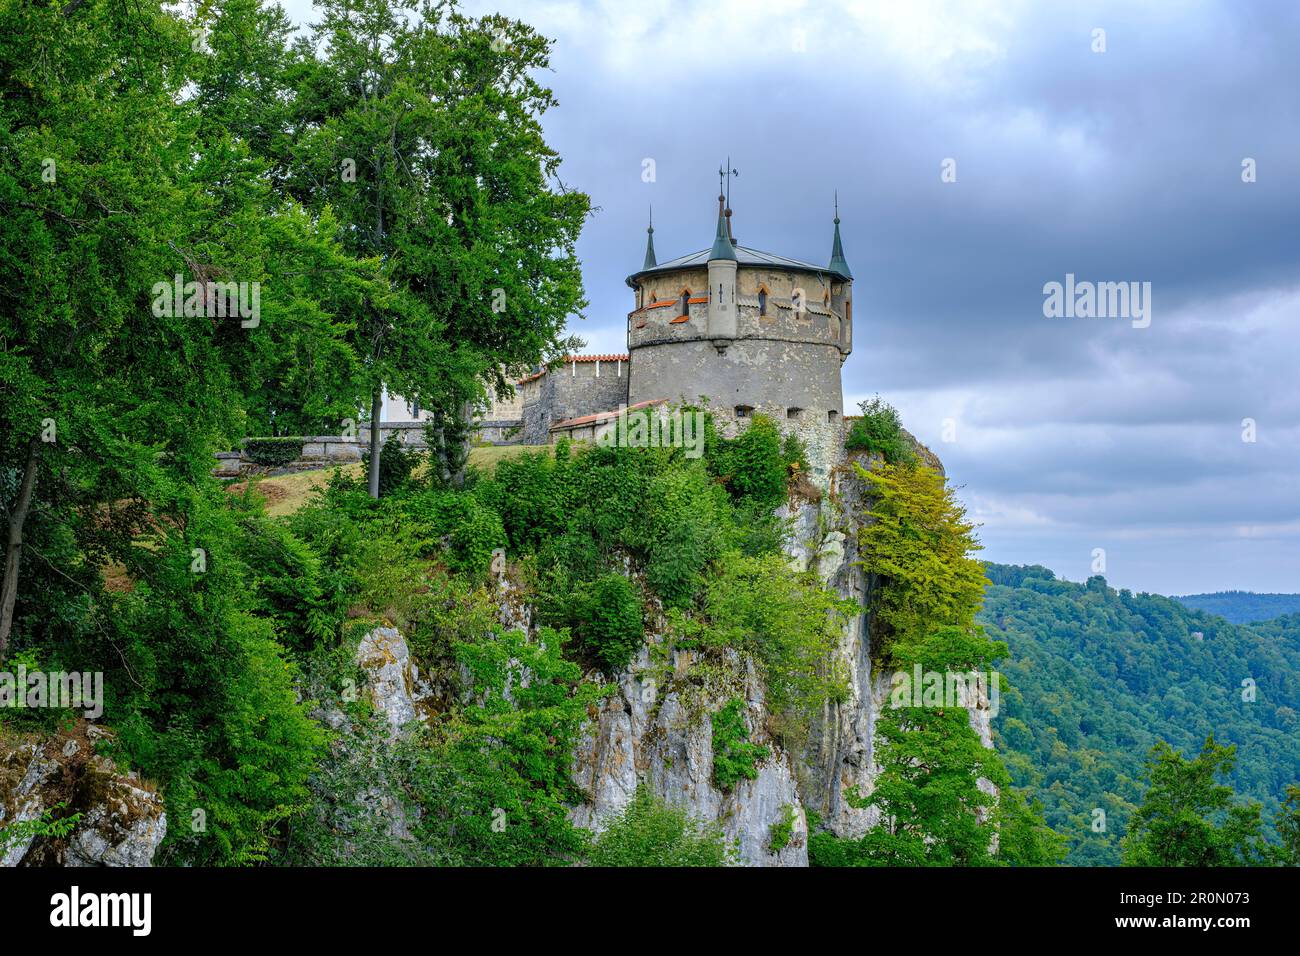 Remote view of Lichtenstein Castle, a Historicist edifice in neo-Gothic style, overlooking the settlement of Honau, Baden-Wurttemberg, Germany. Stock Photo